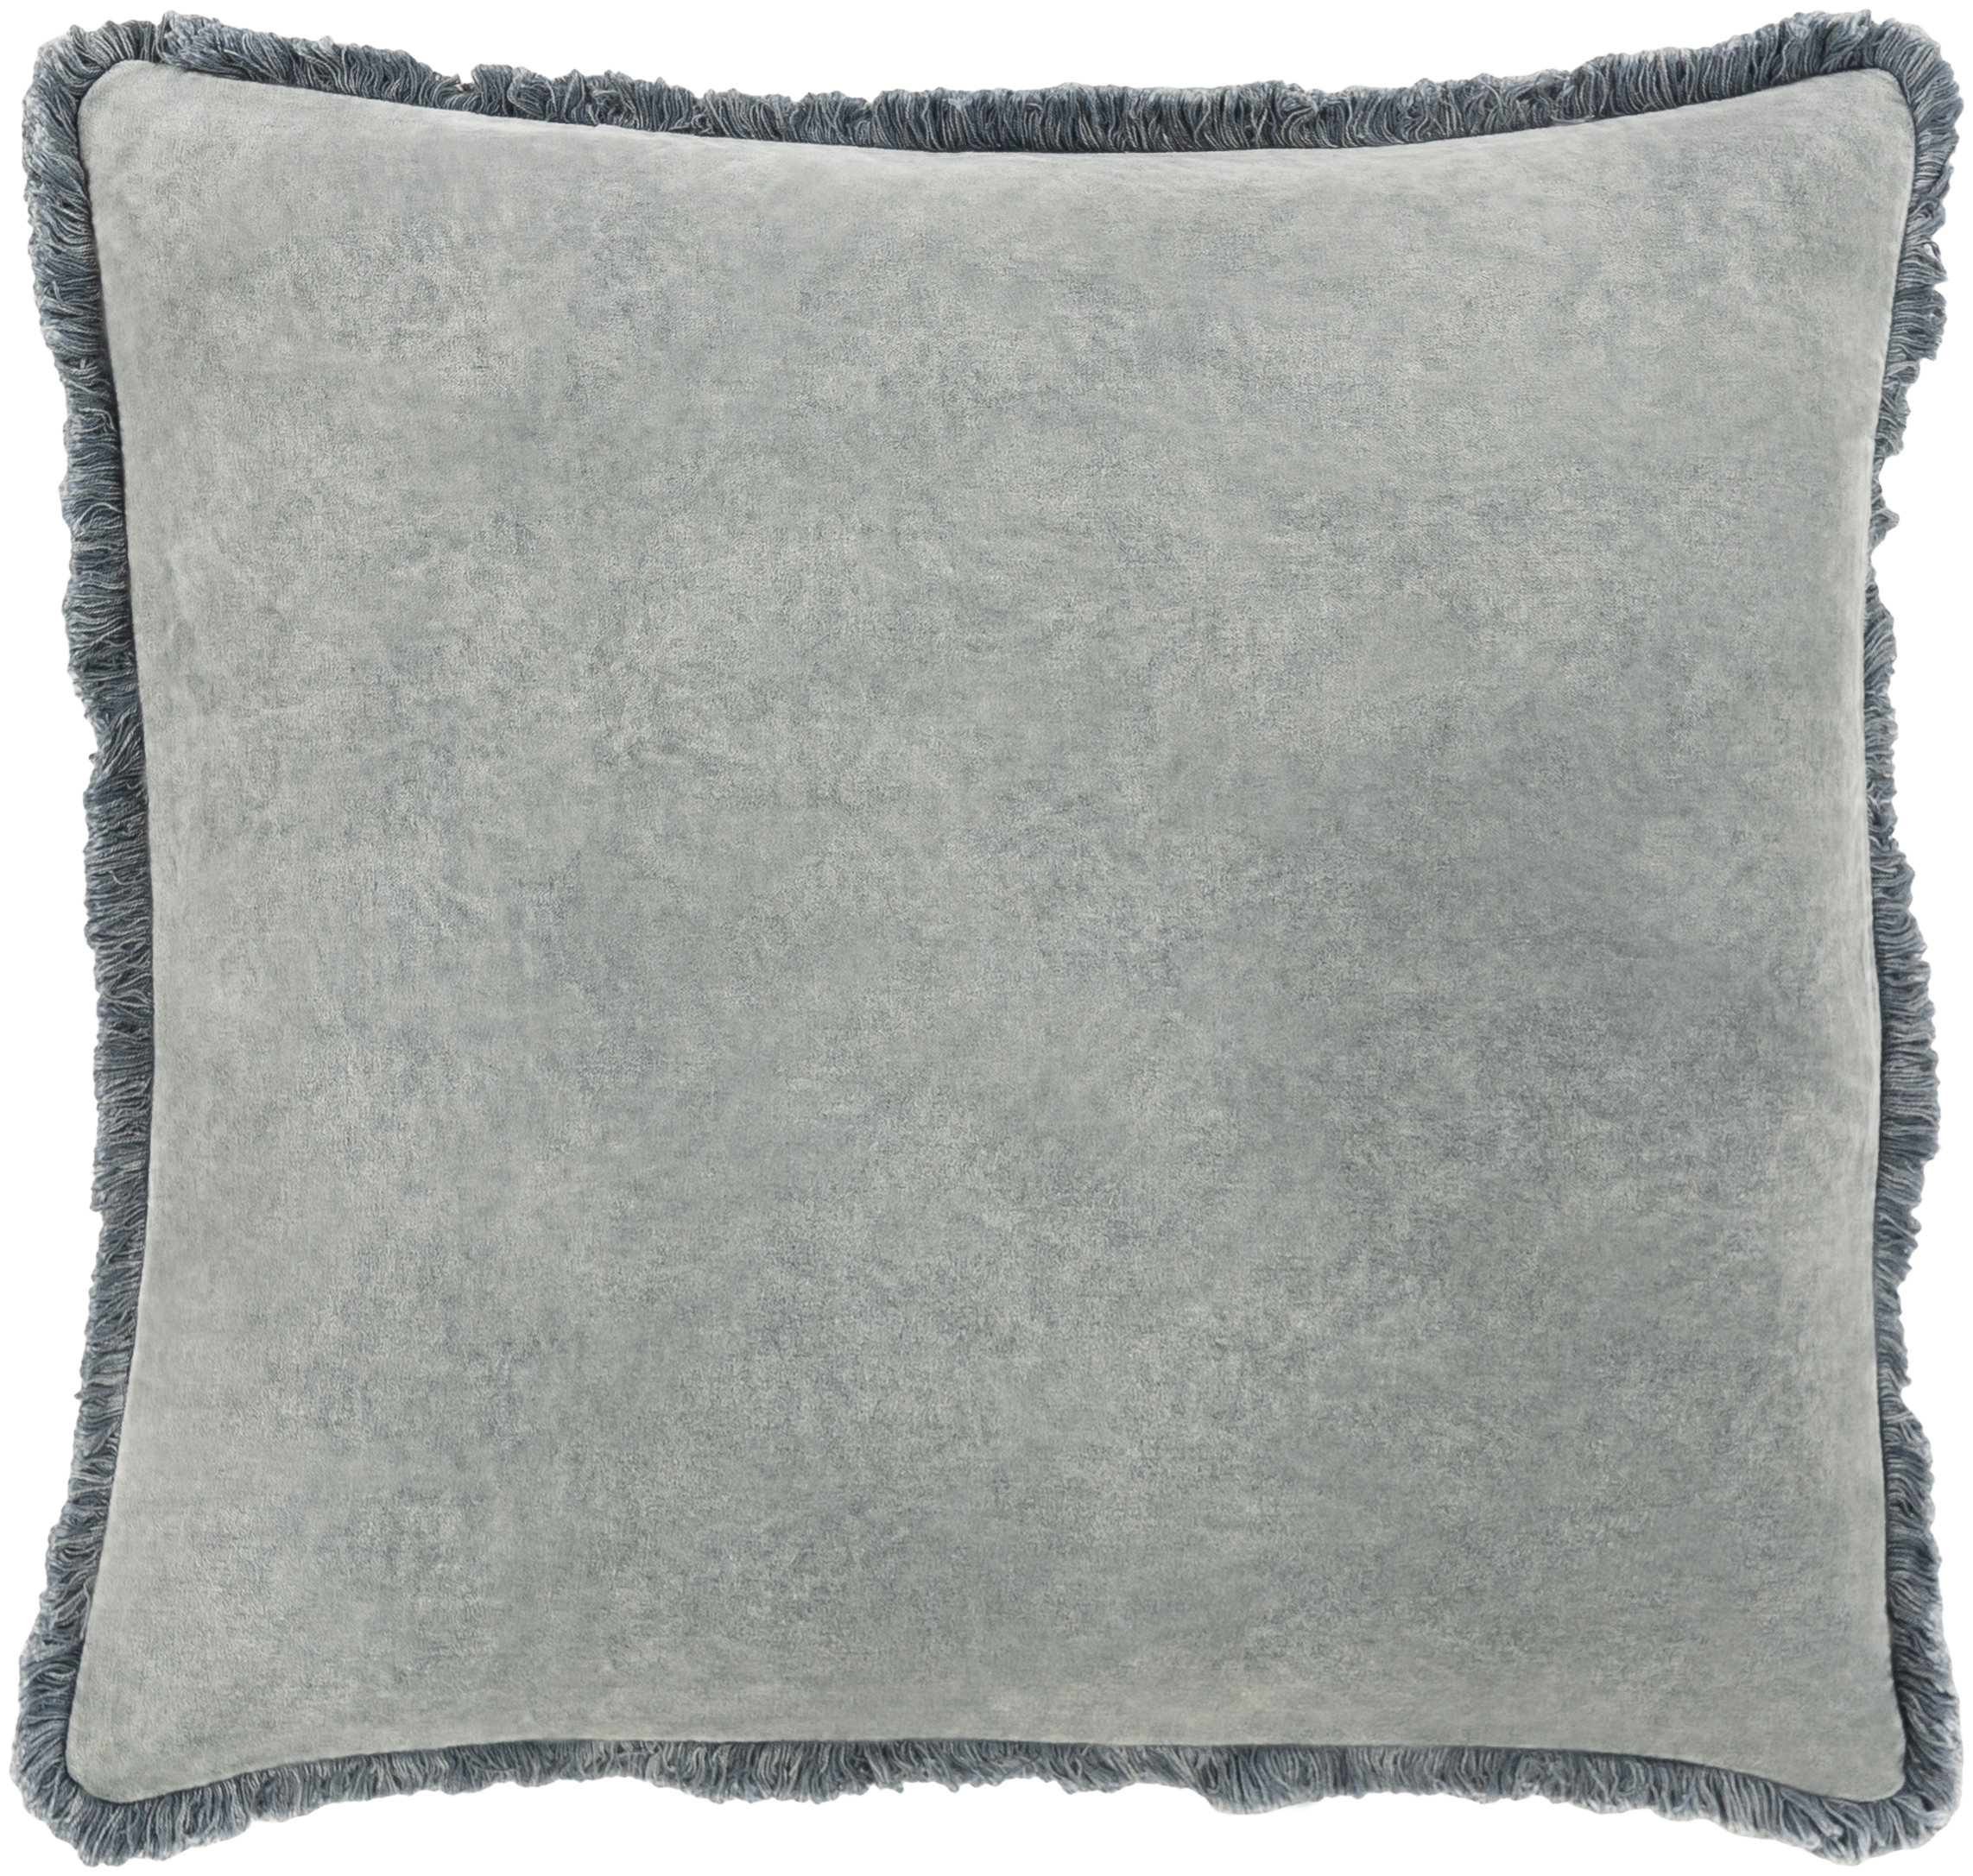 Washed Cotton Velvet Throw Pillow, 18" x 18", with down insert - Image 0